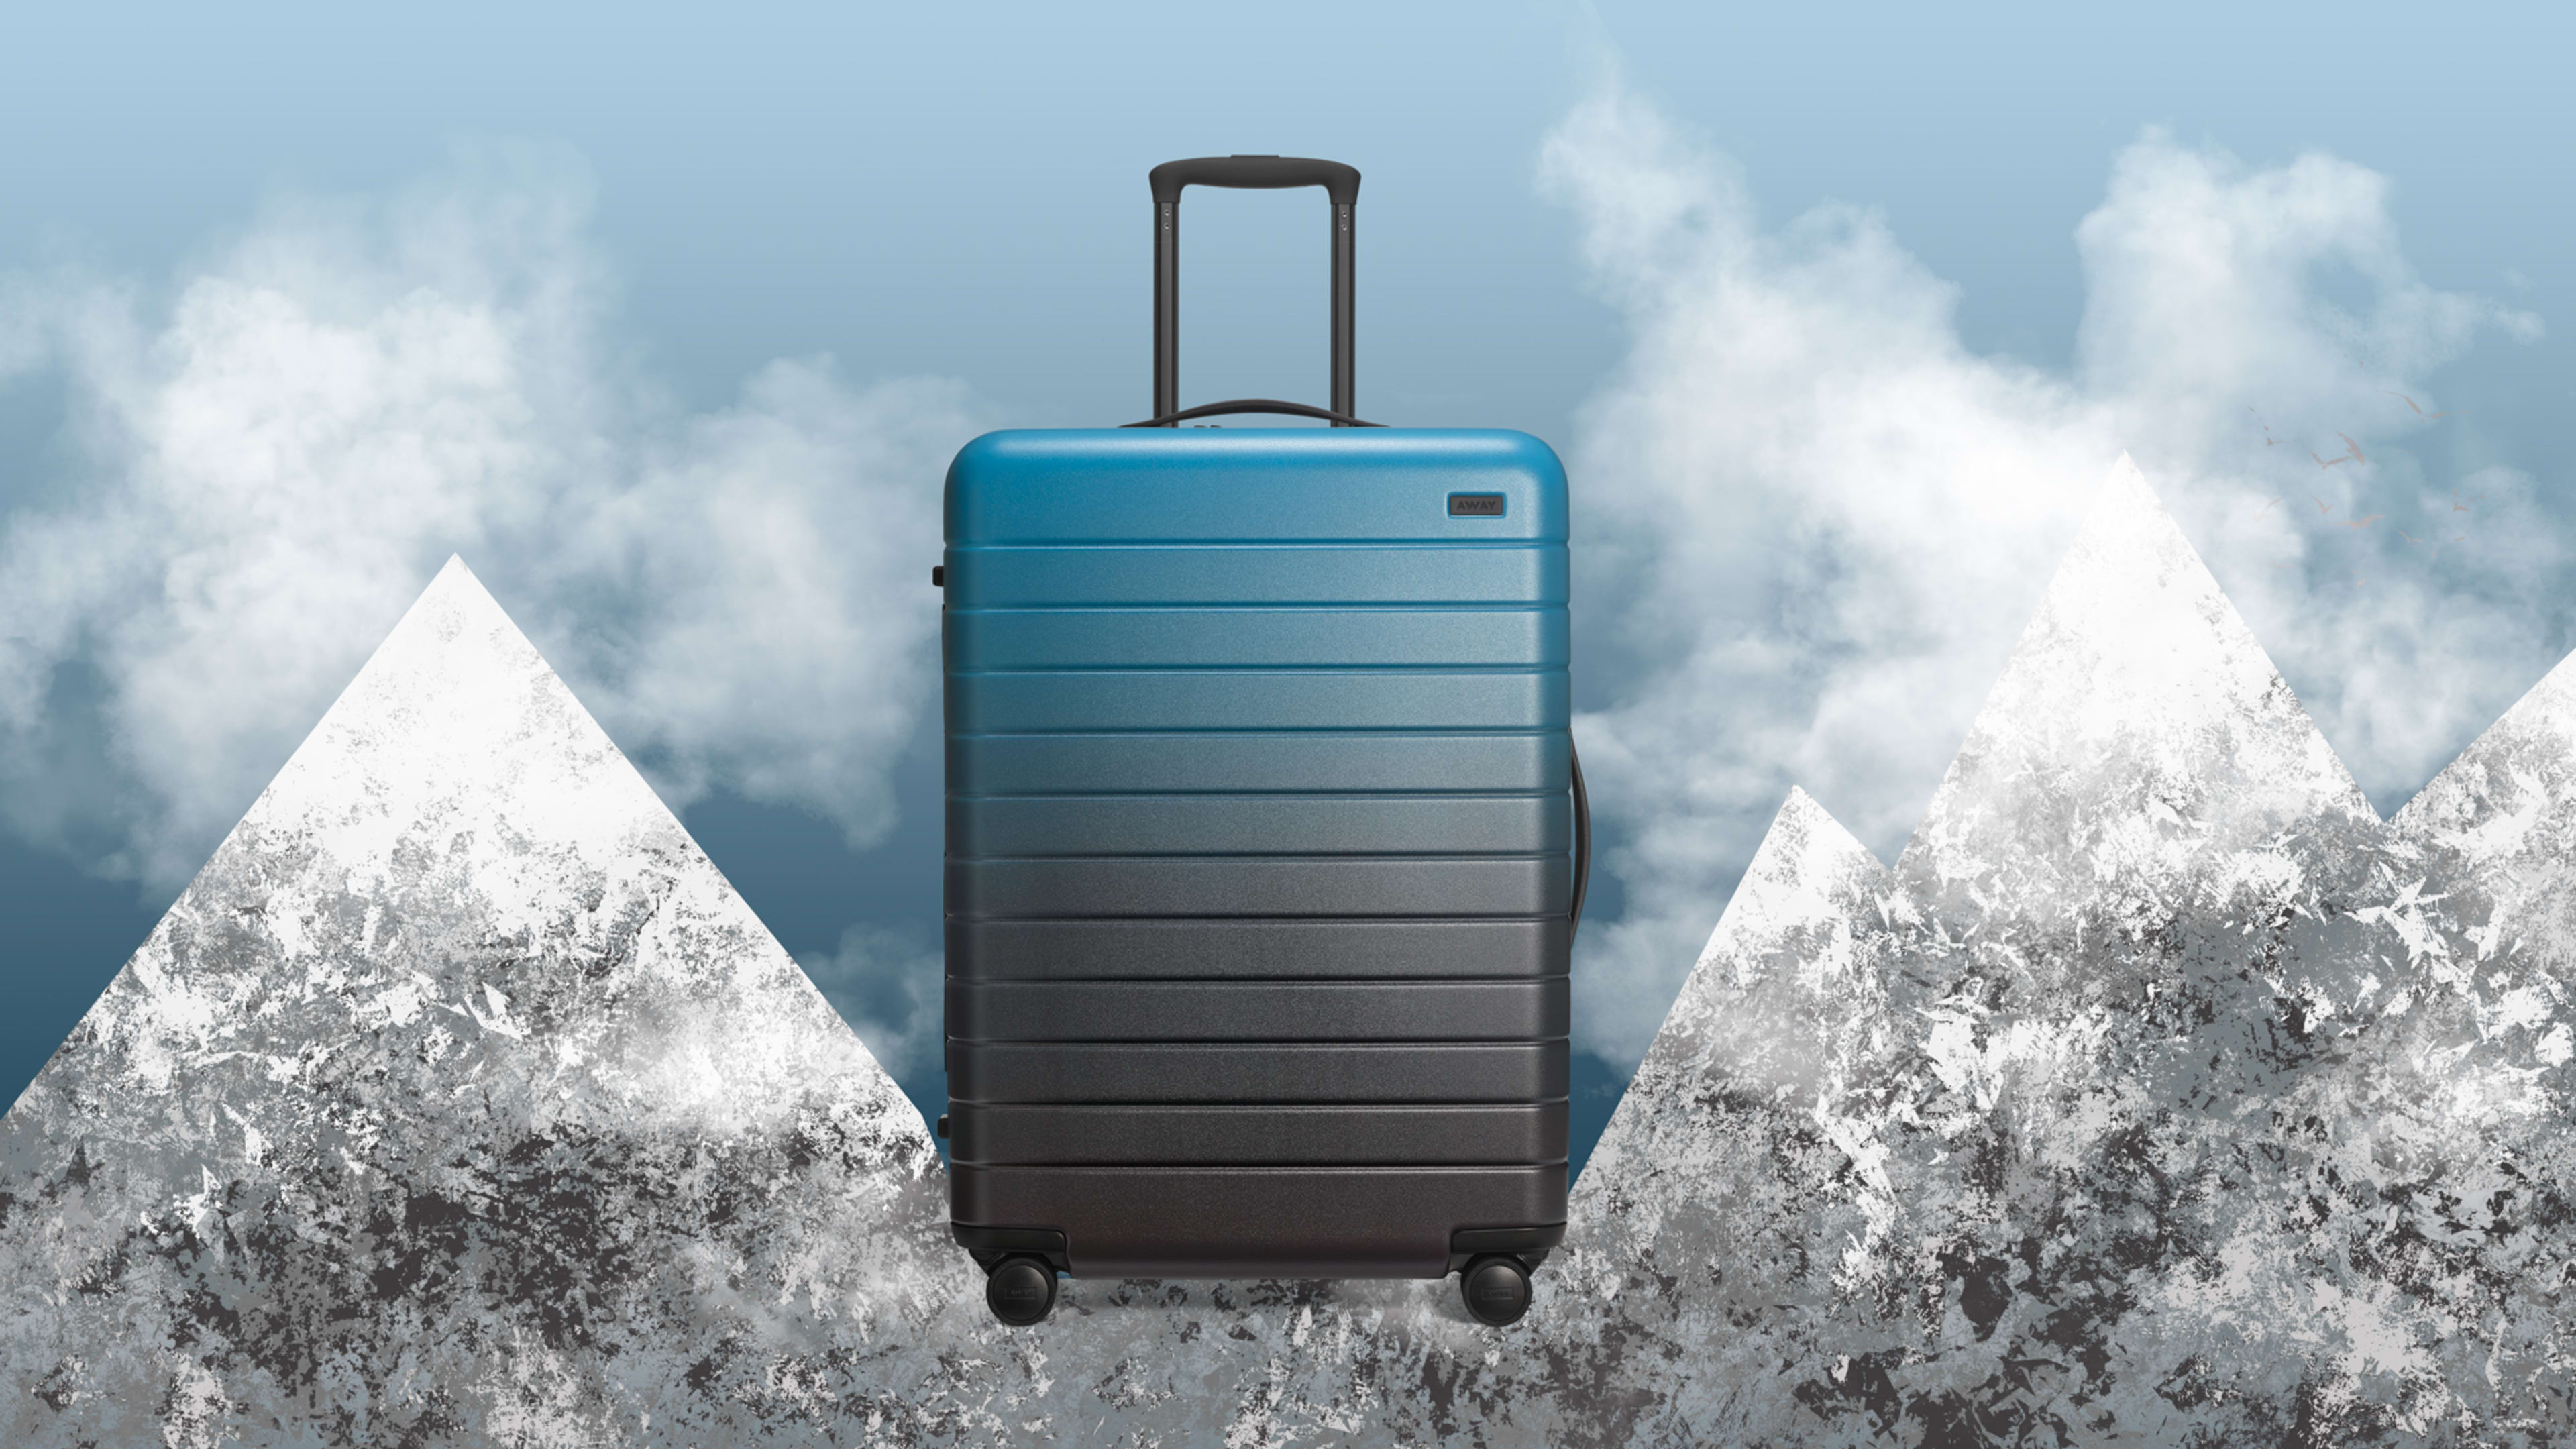 Thinking of (gasp) traveling again? Away is having a rare sale on suitcases and bags